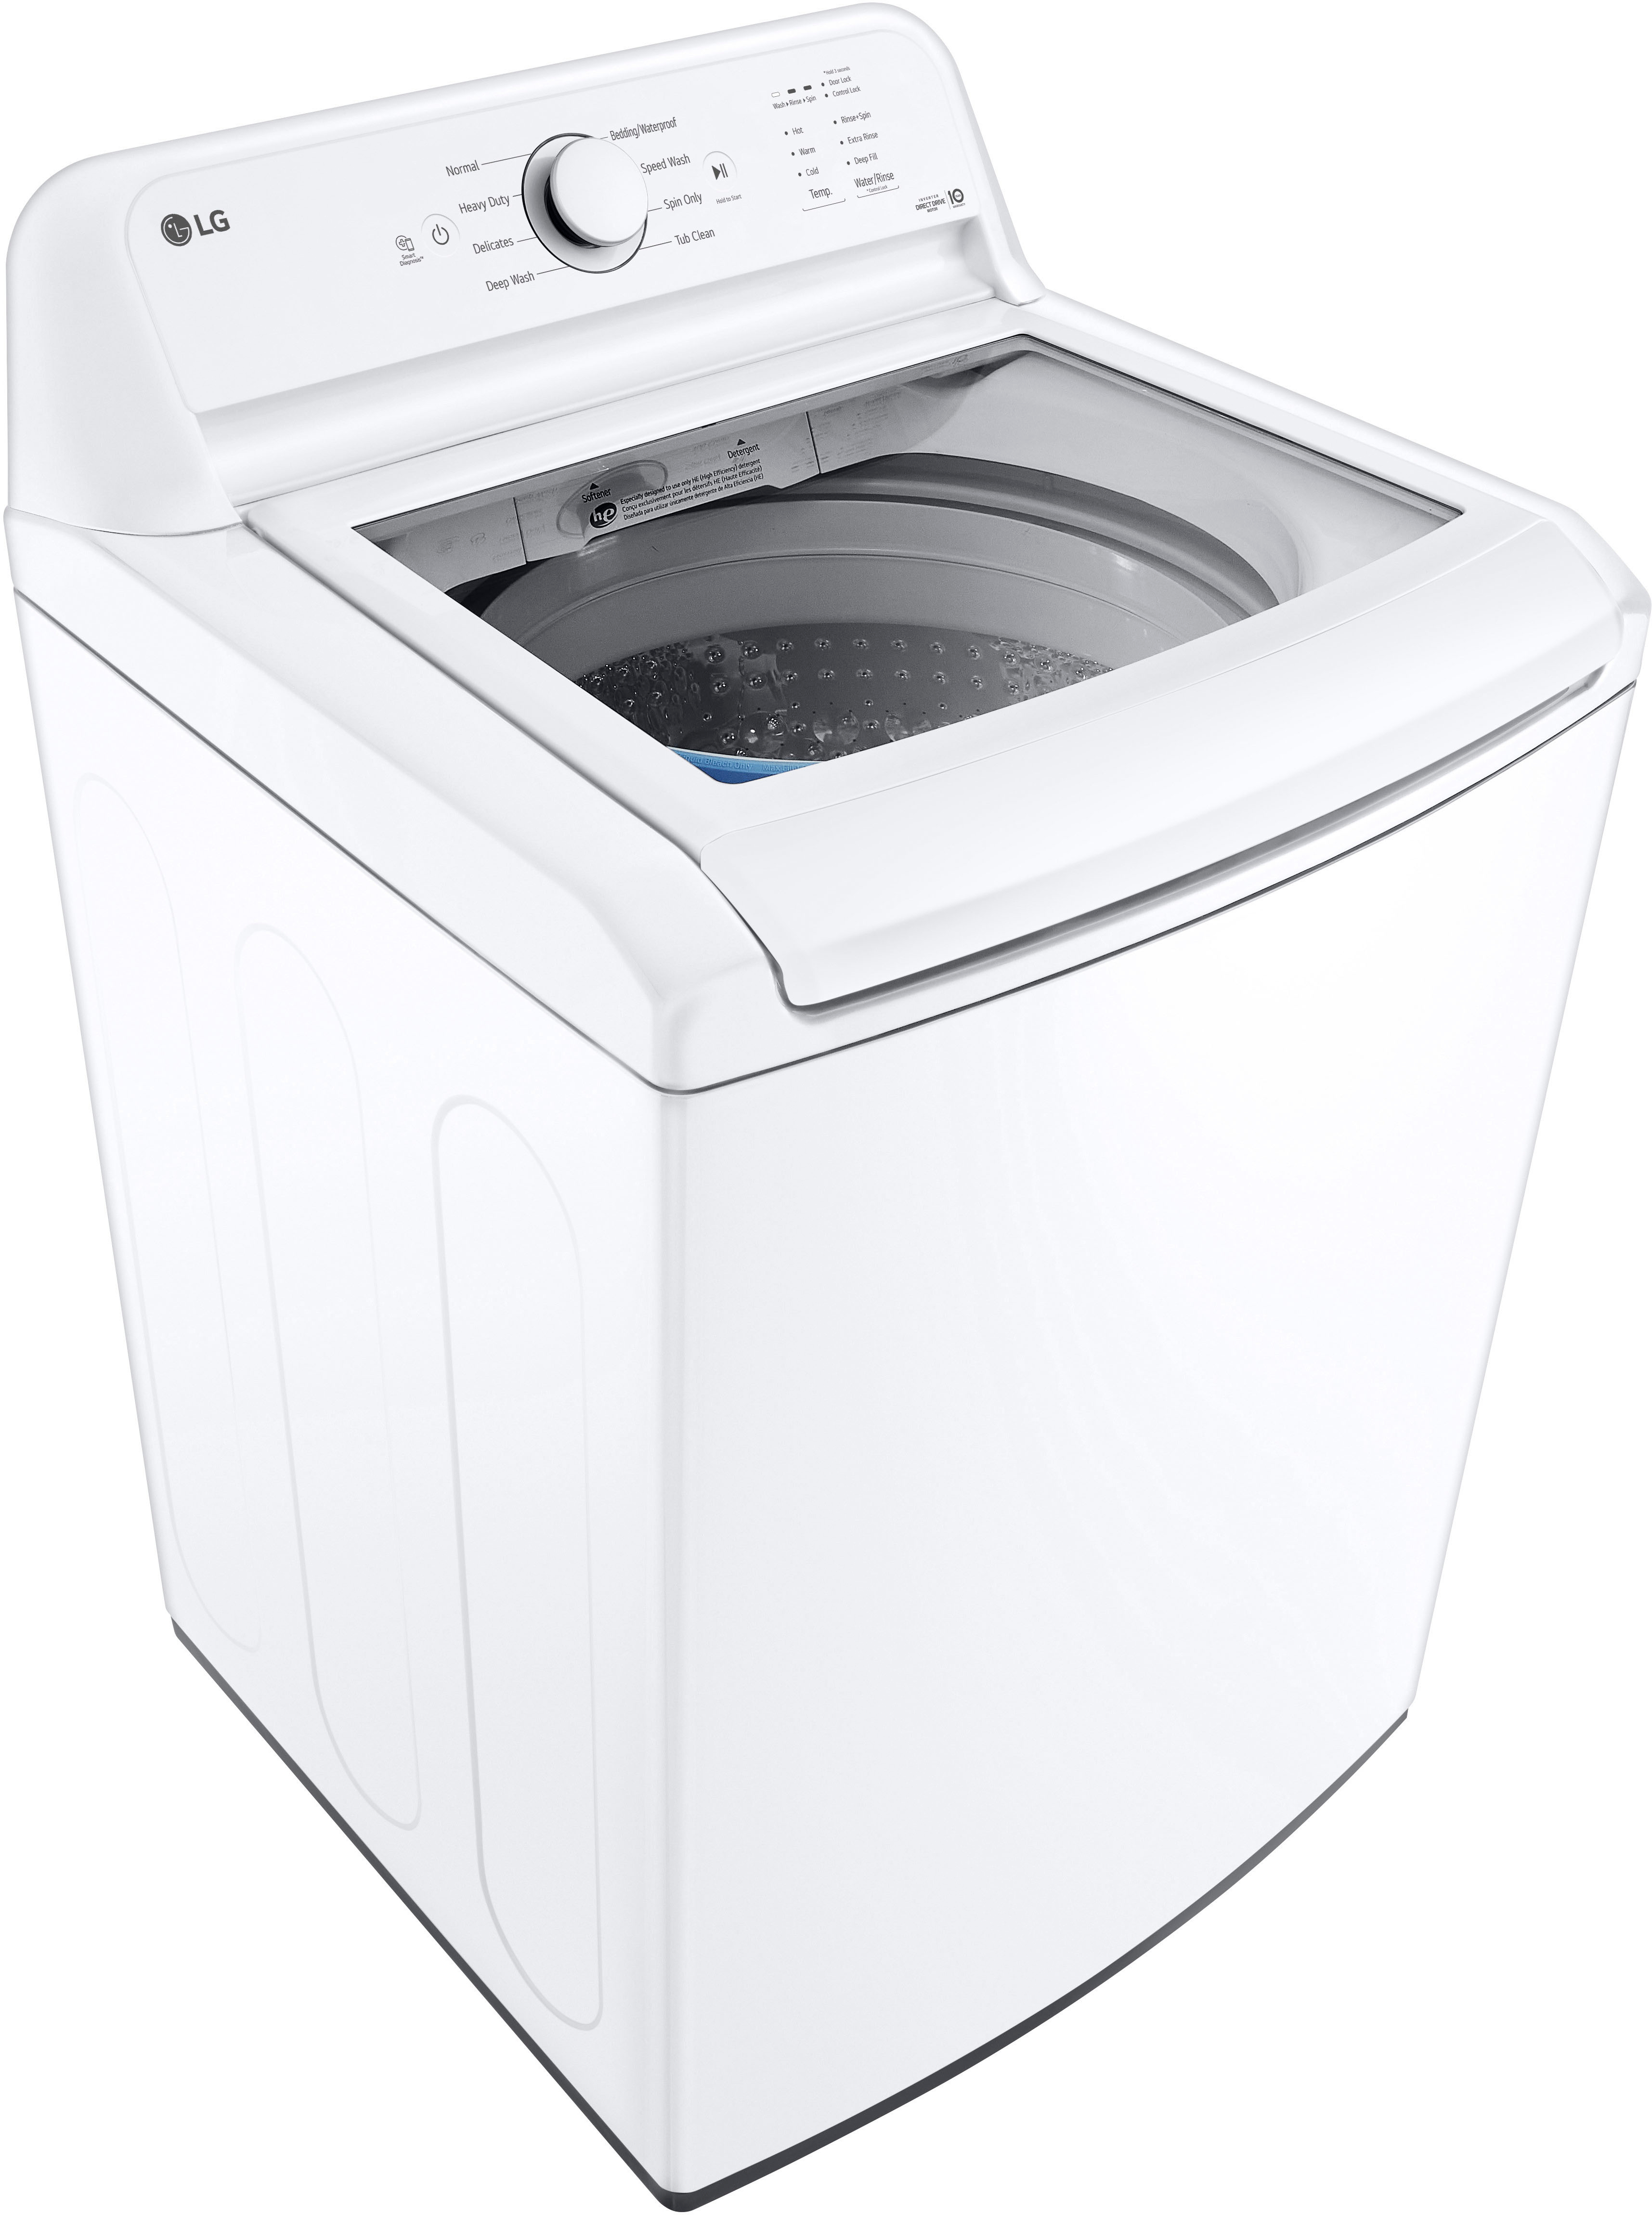 Angle View: Samsung - 4.4 cu. ft. Top Load Washer with ActiveWave Agitator and Active WaterJet - Platinum